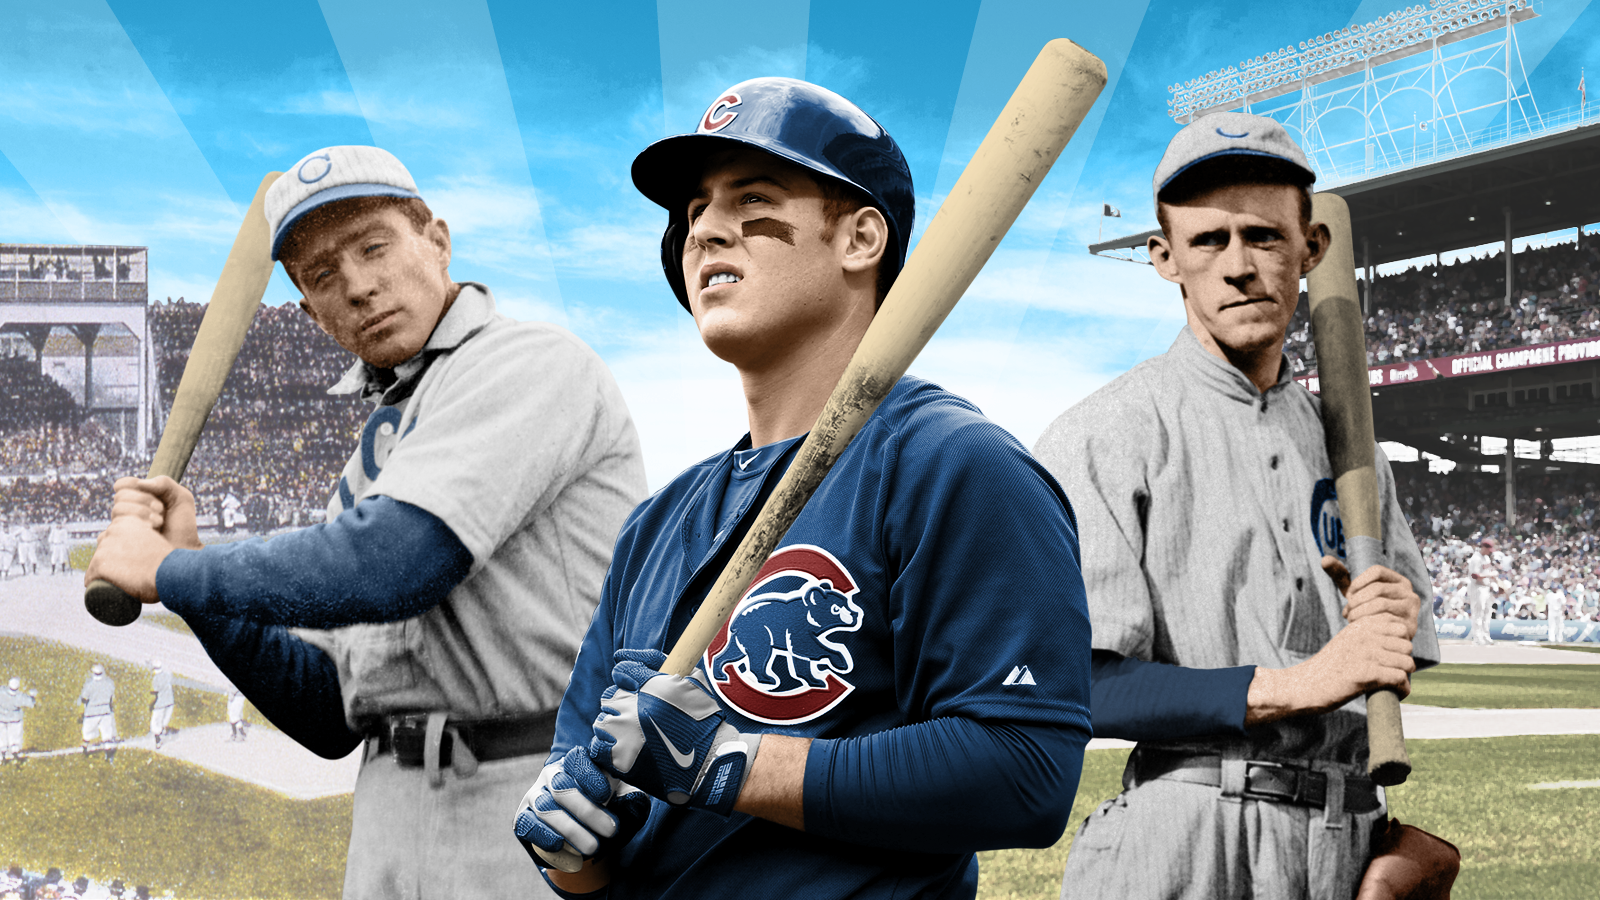 Gallery: Key Moments in Chicago Cubs Baseball Since 1908 - WSJ